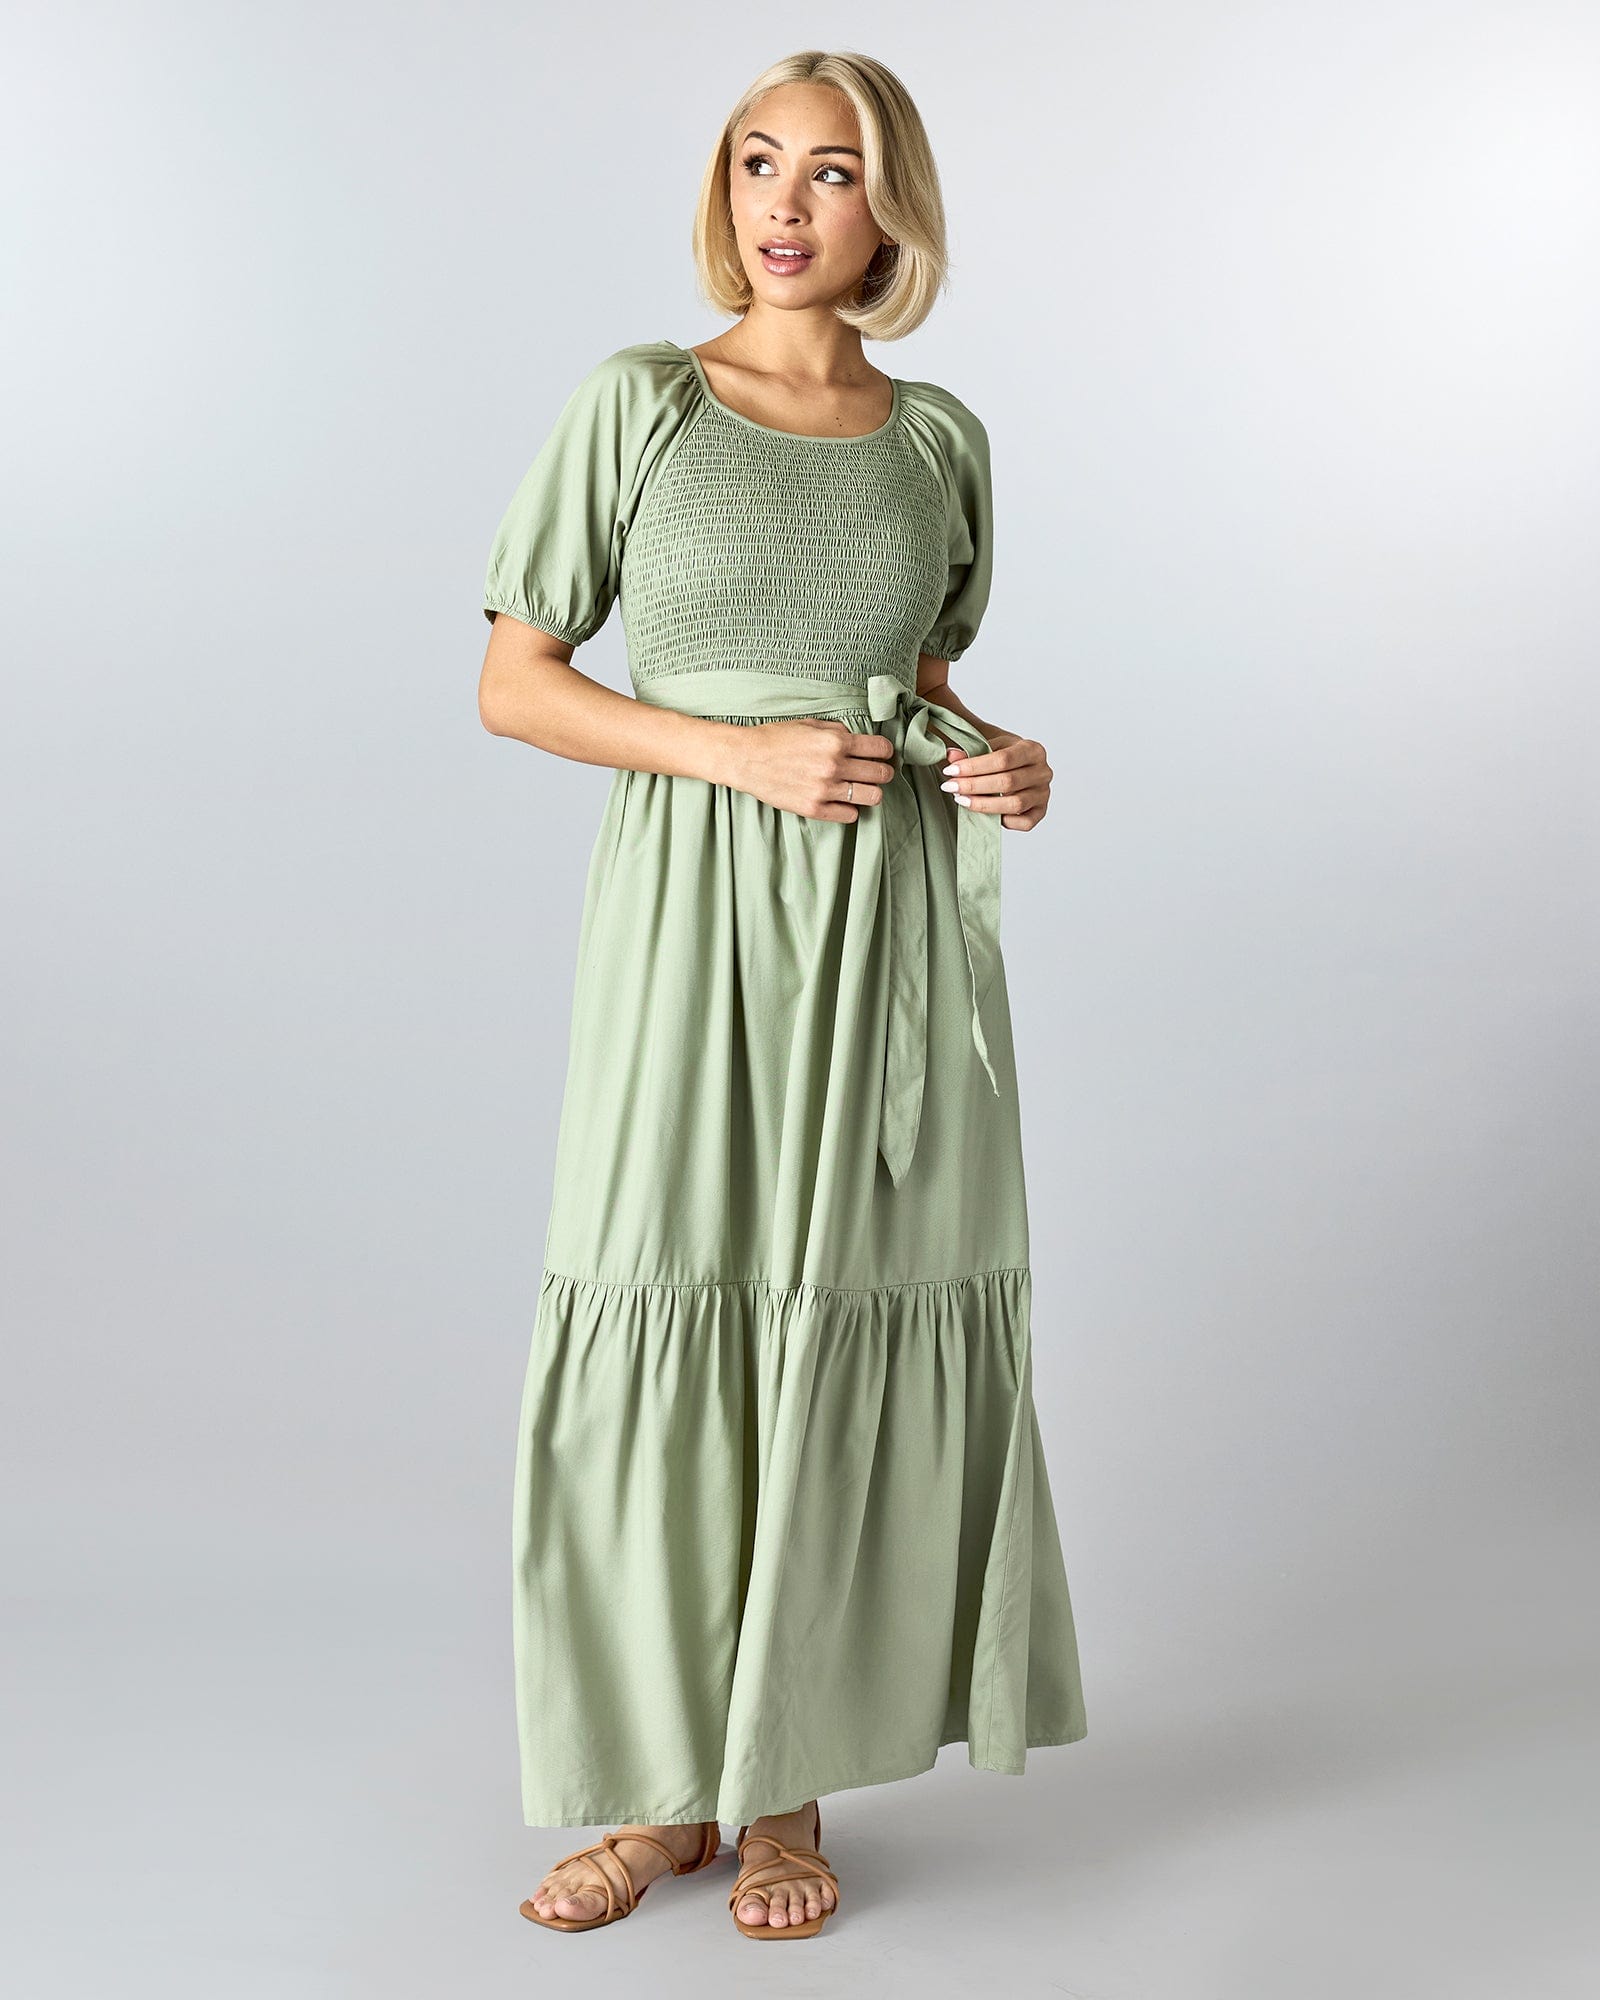 Woman in a green, short sleeved, maxi-length dress with smocking on bodice and a tie at the waist.